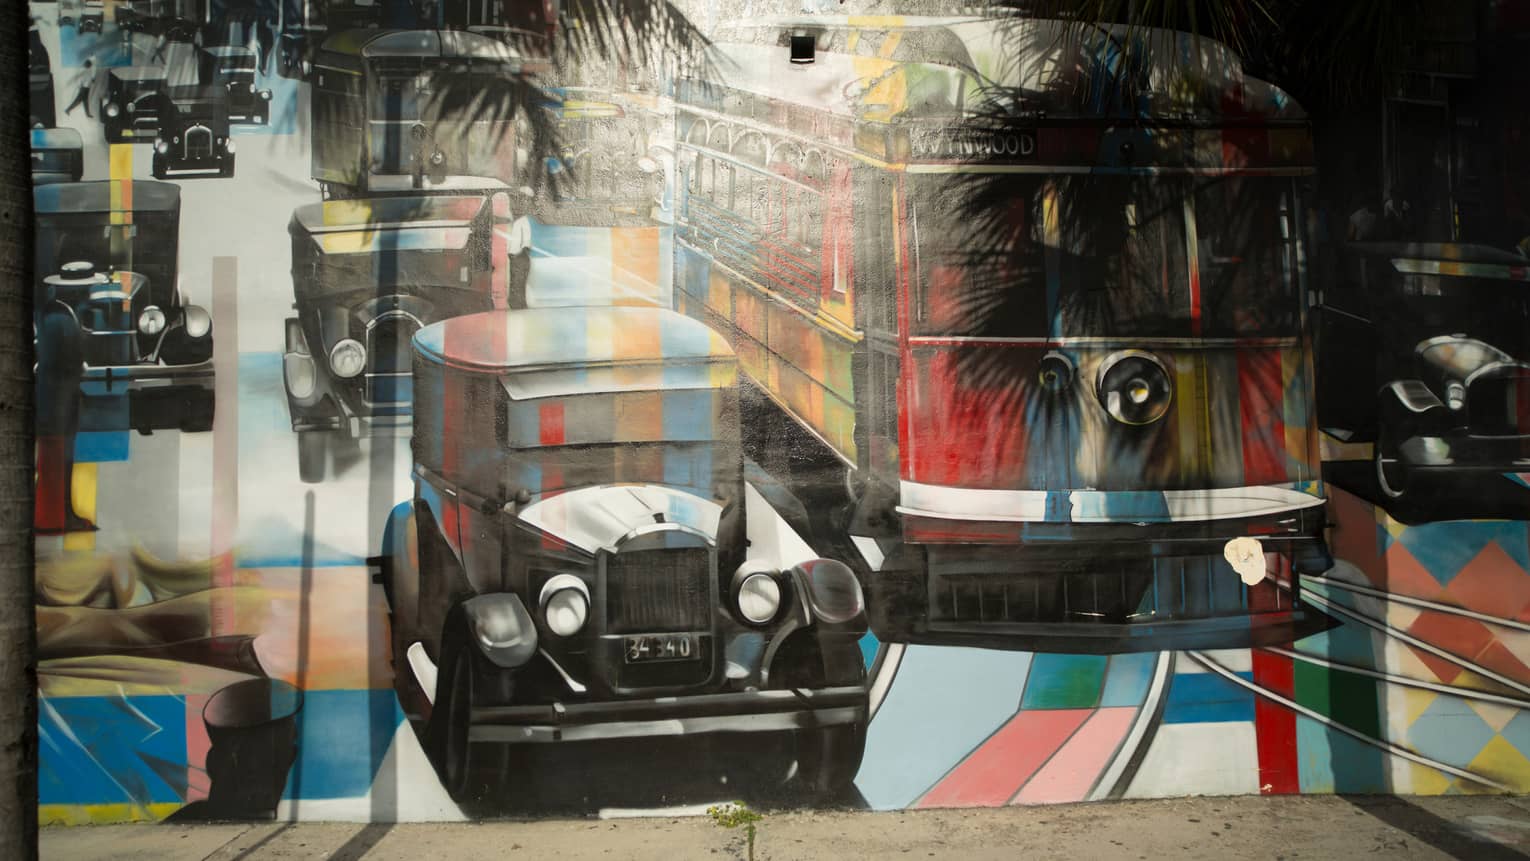 Palm trees cast shadows on a mural of vintage cars and a bus painted in a kaleiscopic pattern of colours and grey shading.